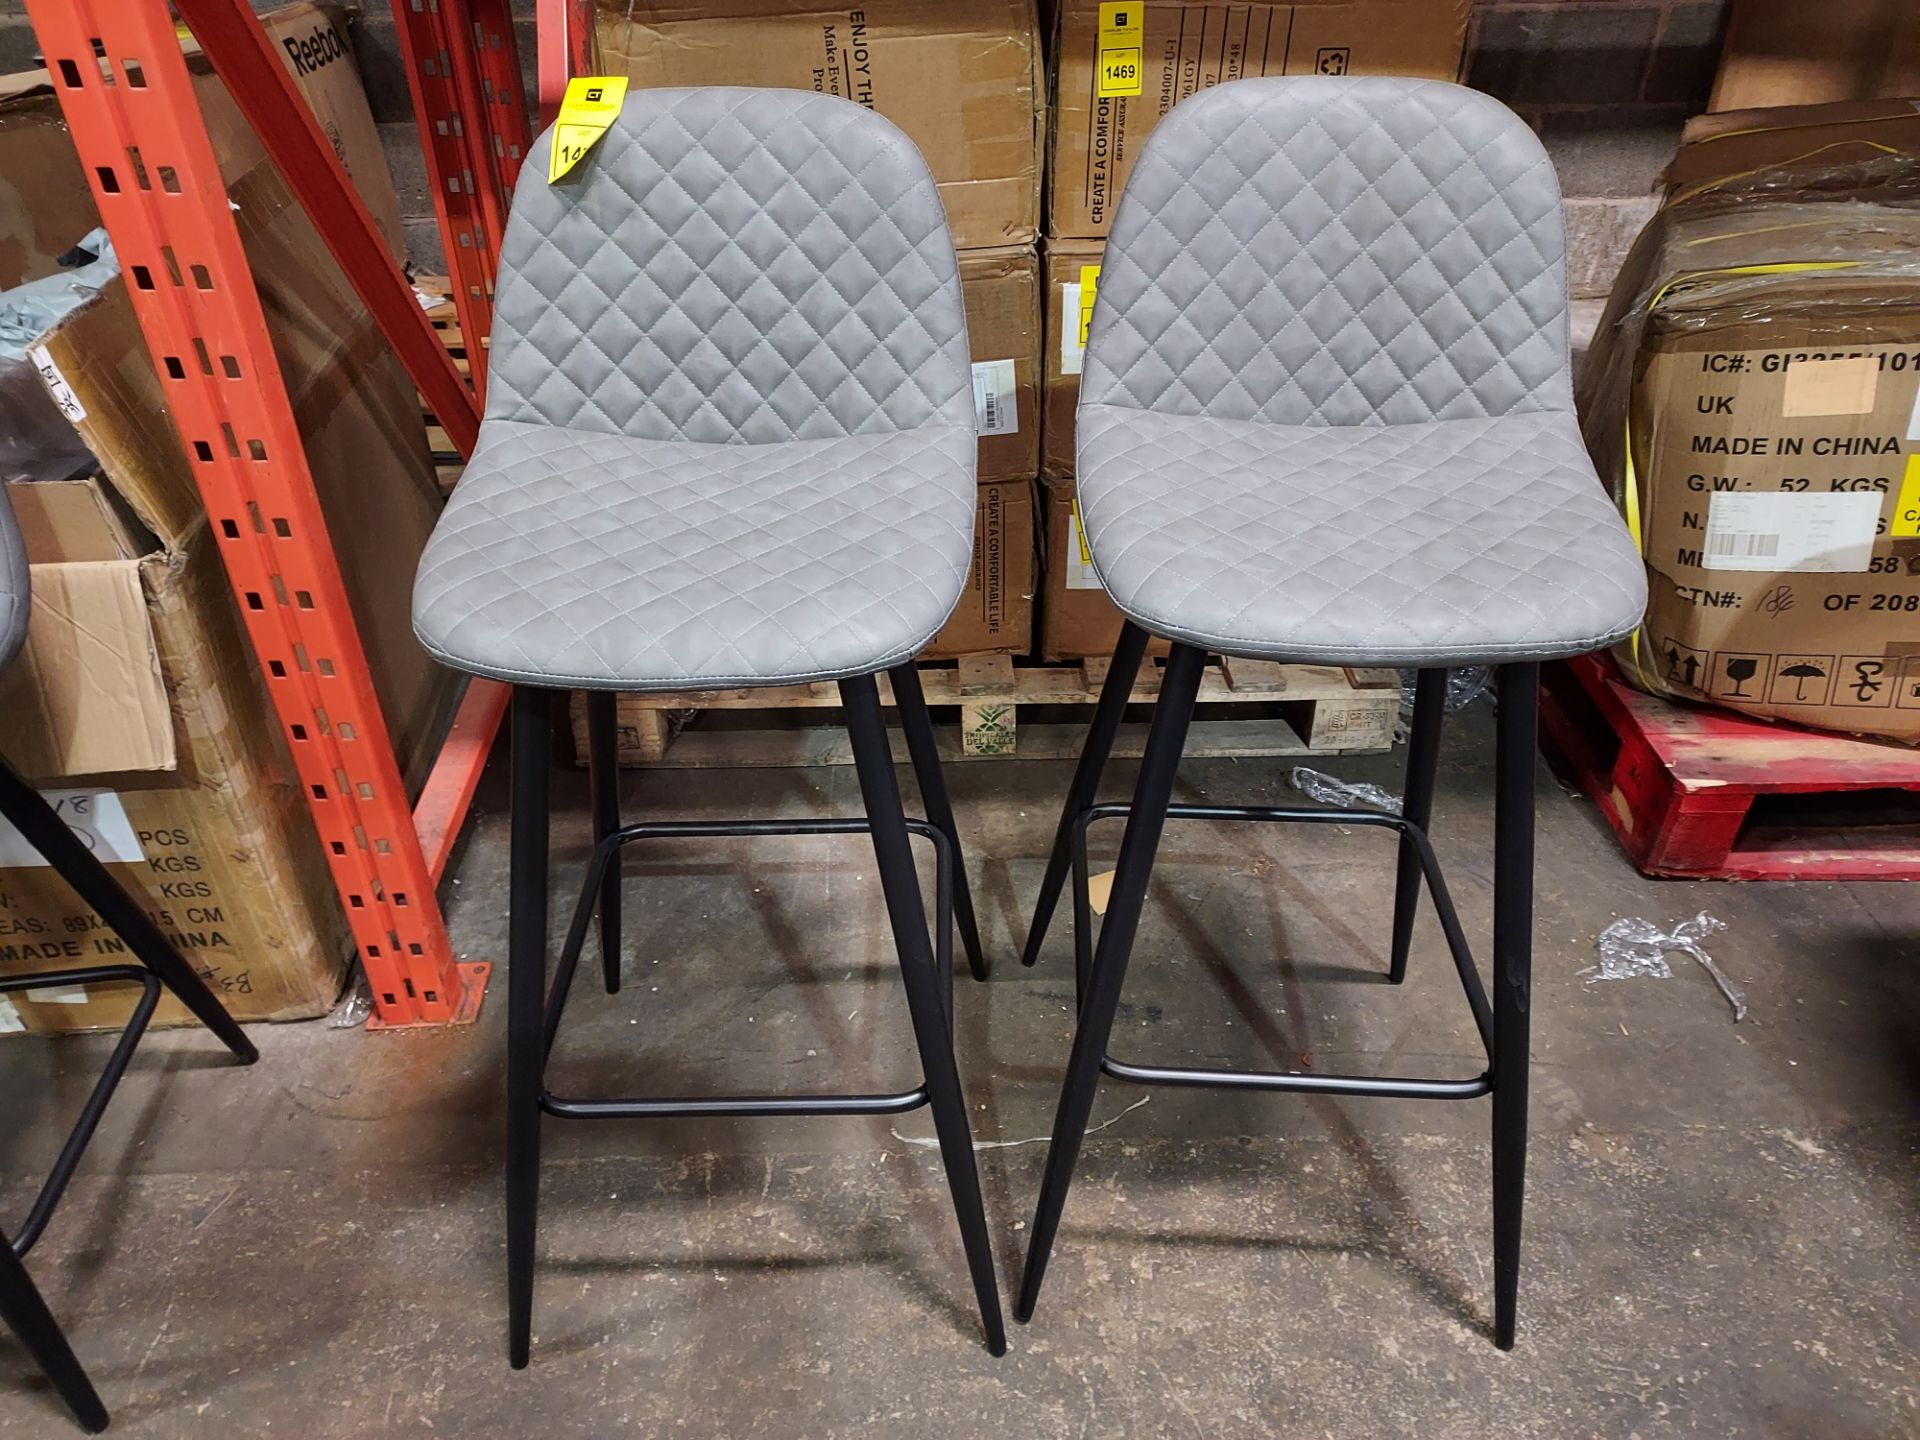 4 X BRAND NEW ENJOY THE GOOD LIFE BAR STOOLS IN LEATHER LOOK GREY IN TWO BOXES